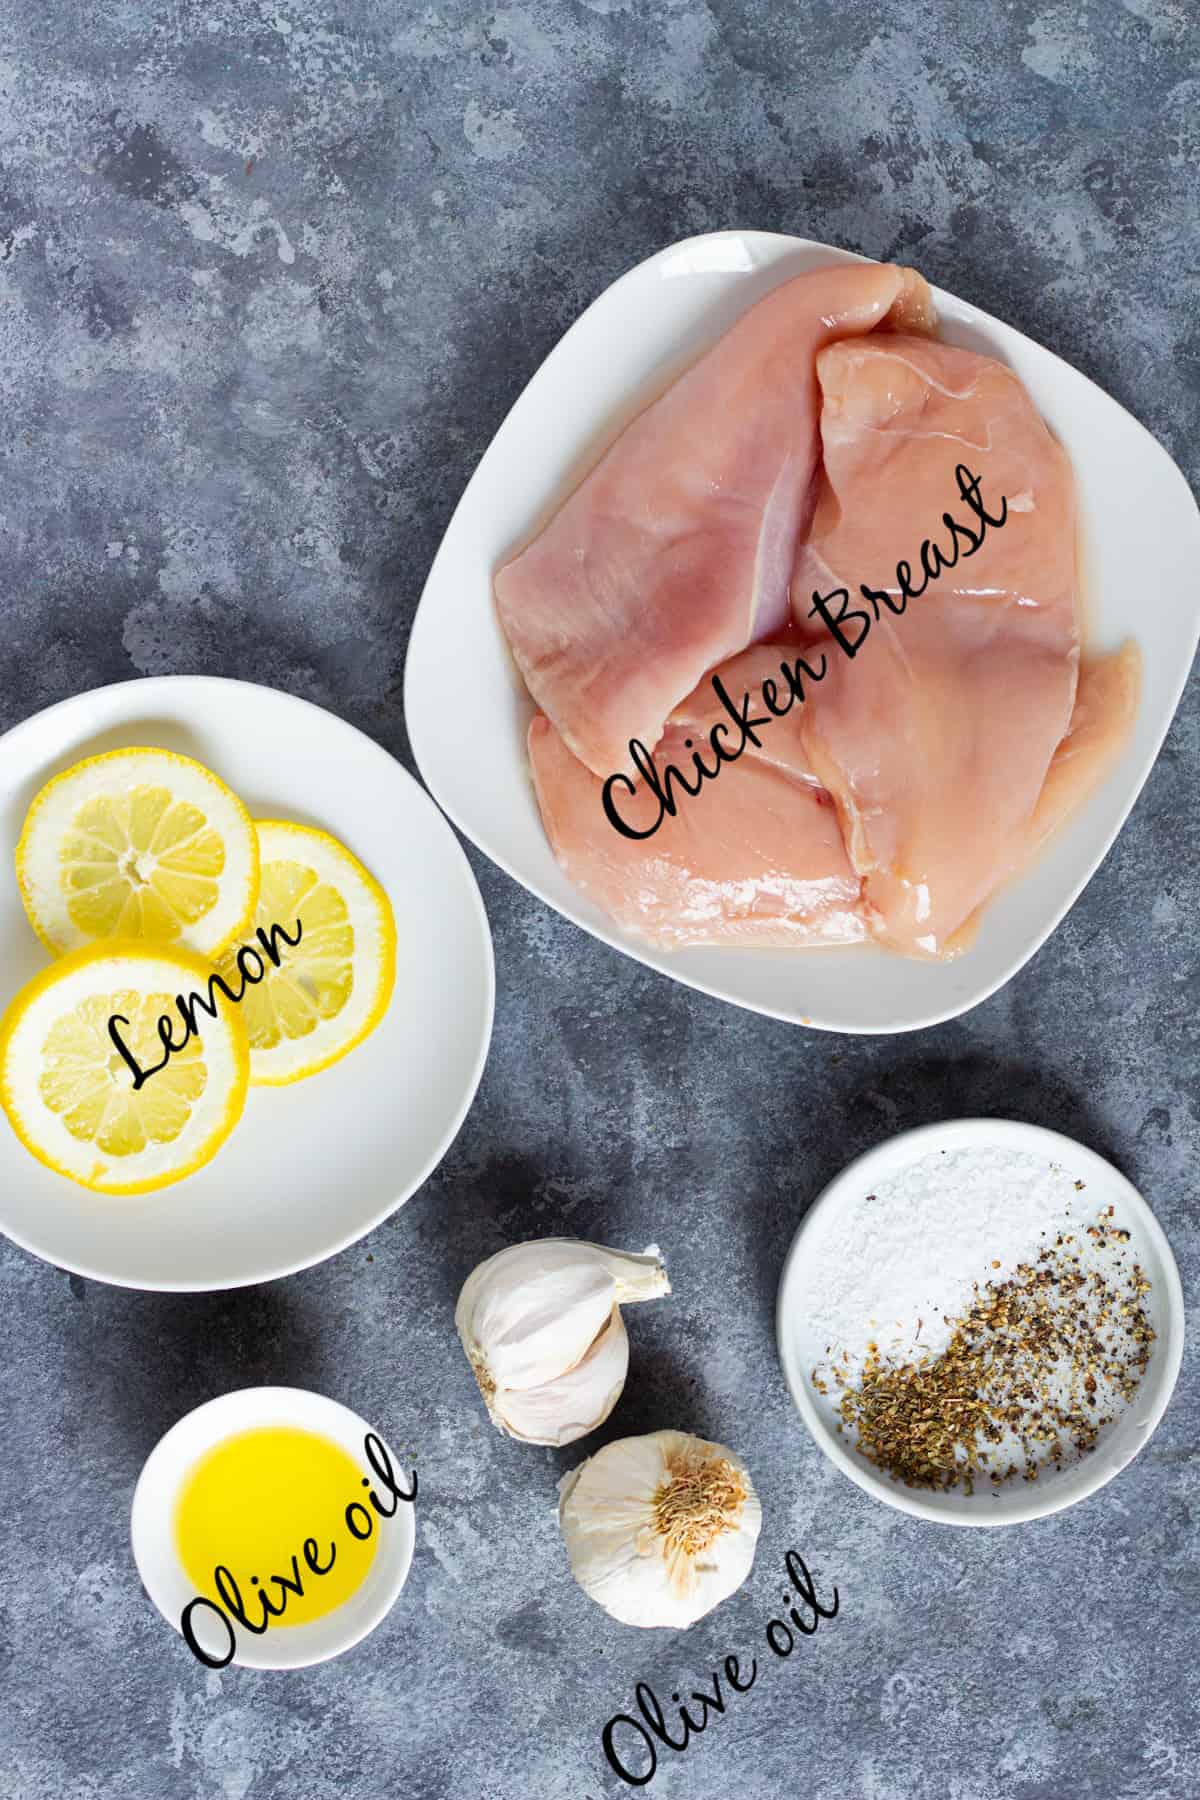 The ingredients to make this recipe are chicken breast, lemon, olive oil, garlic, oregano, salt and pepper. 